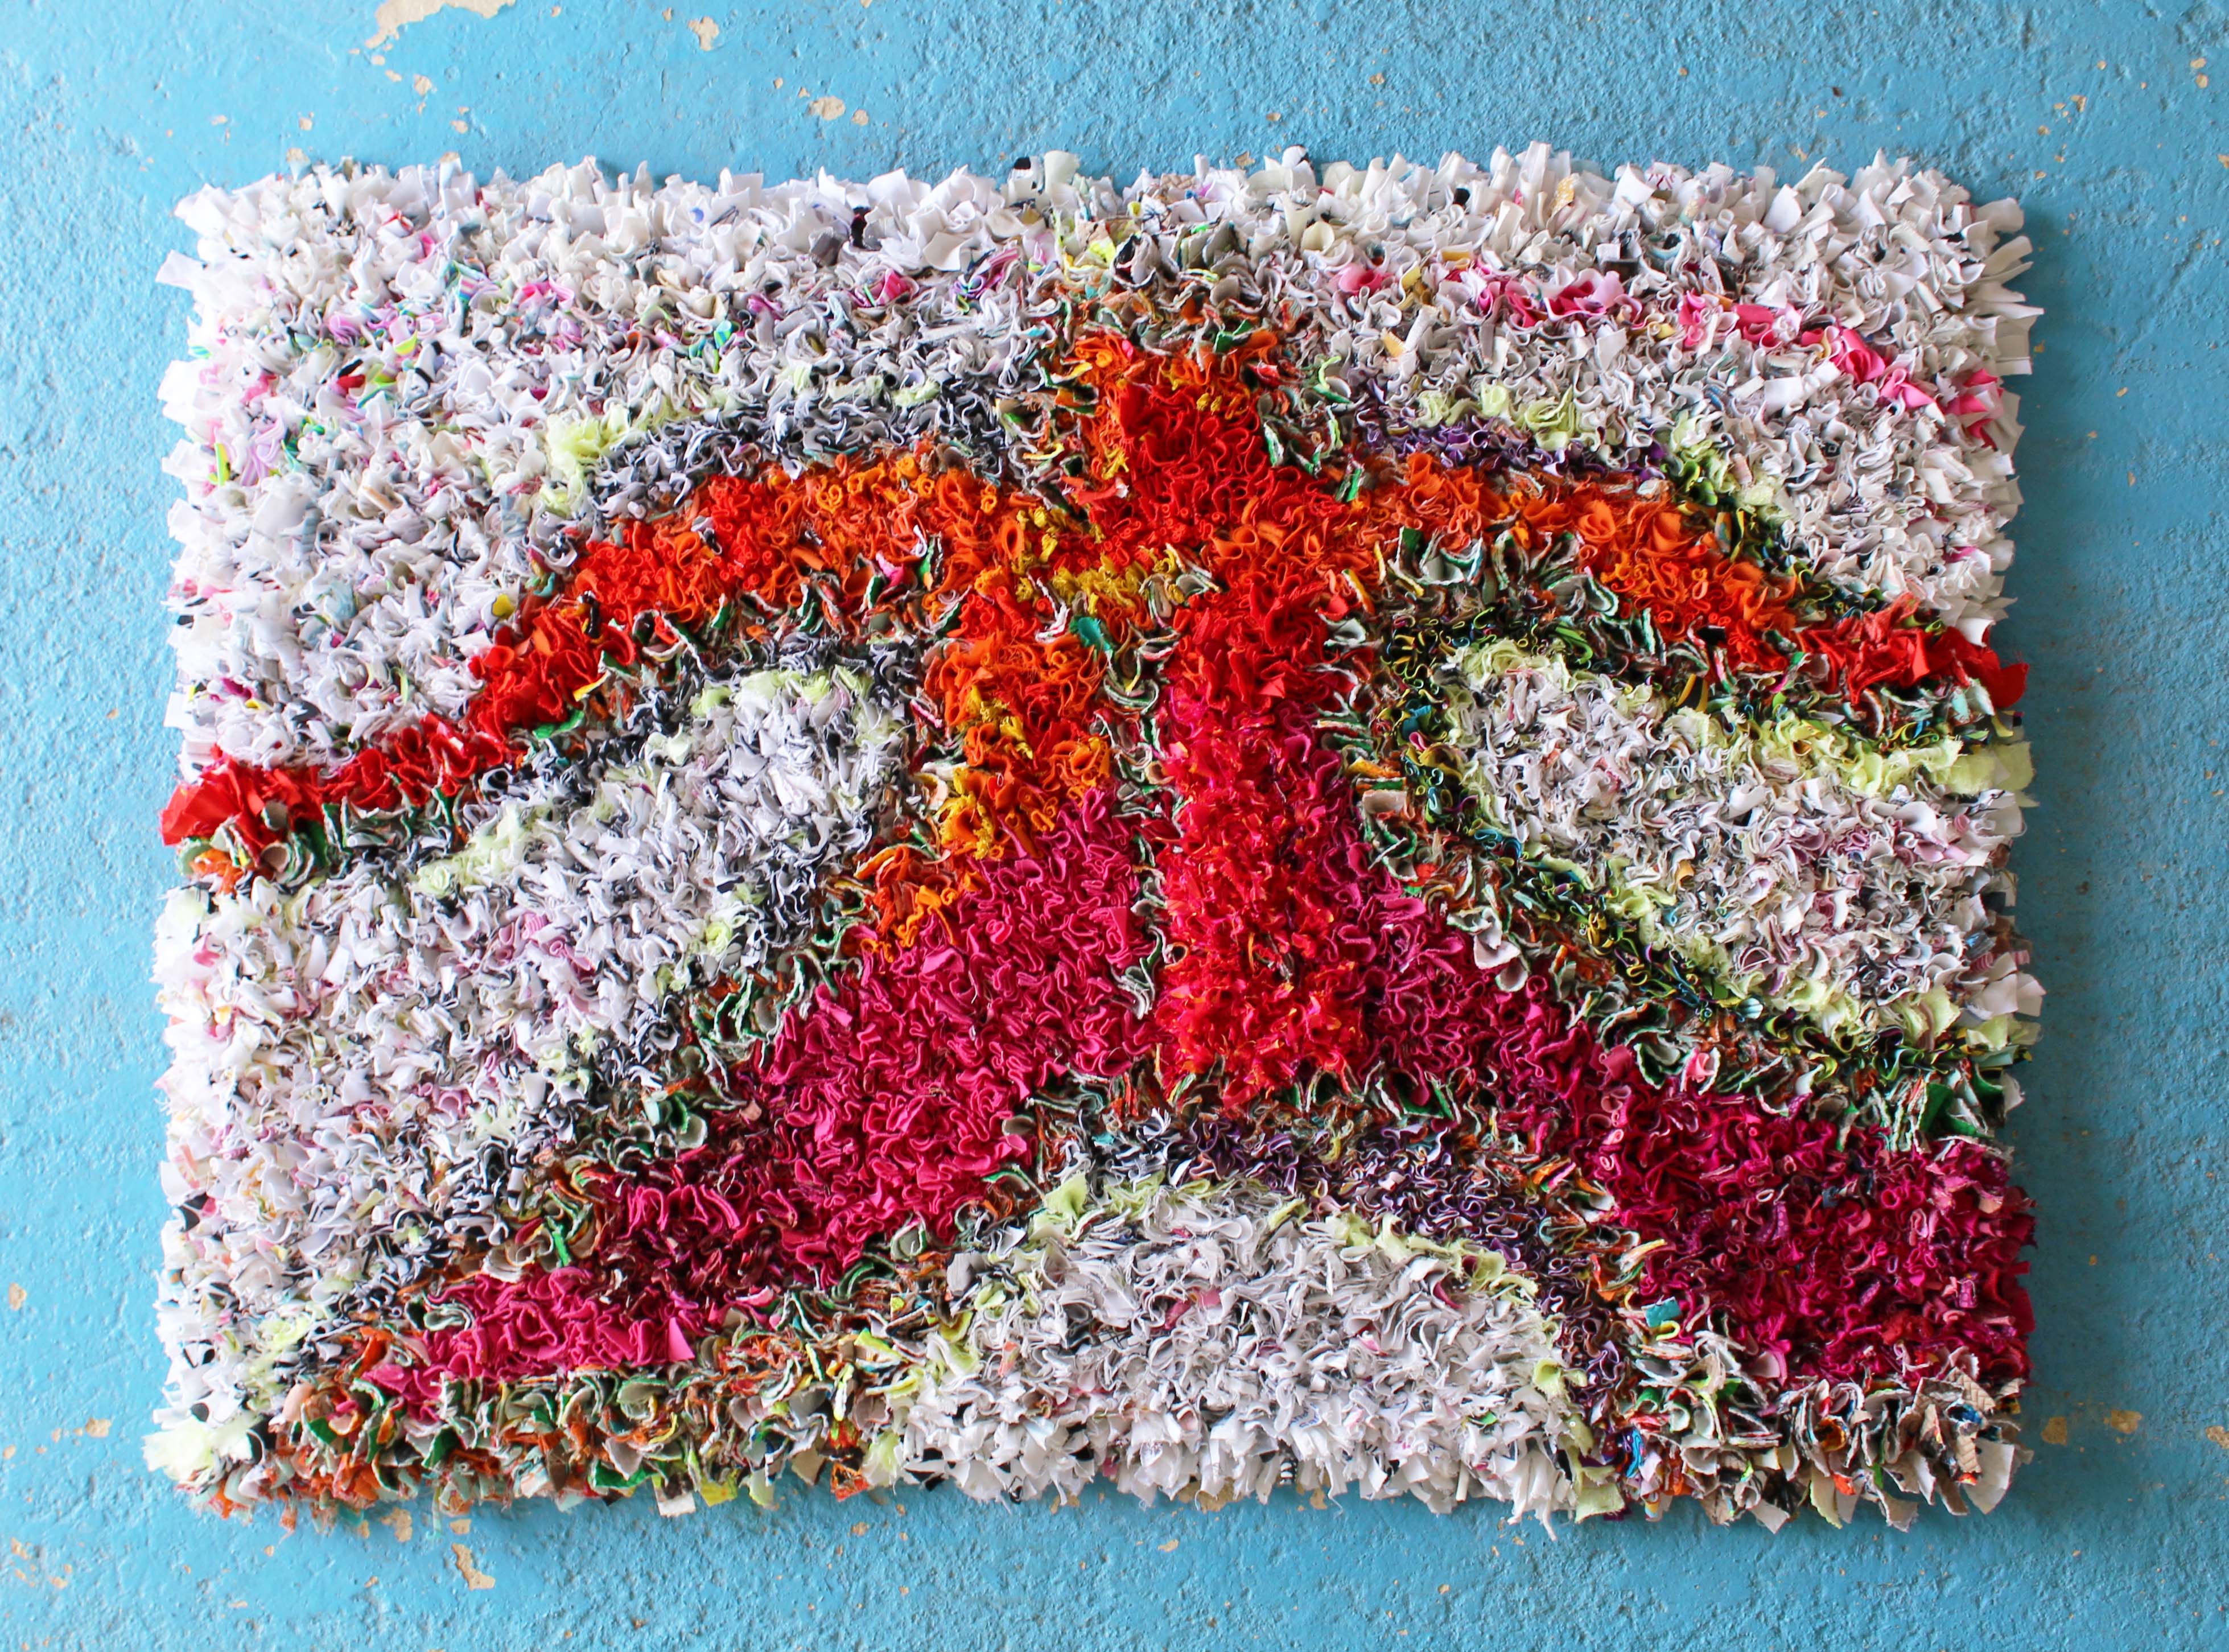 Sicily inspired rag rug person colourful shaggy proggy white orange pink